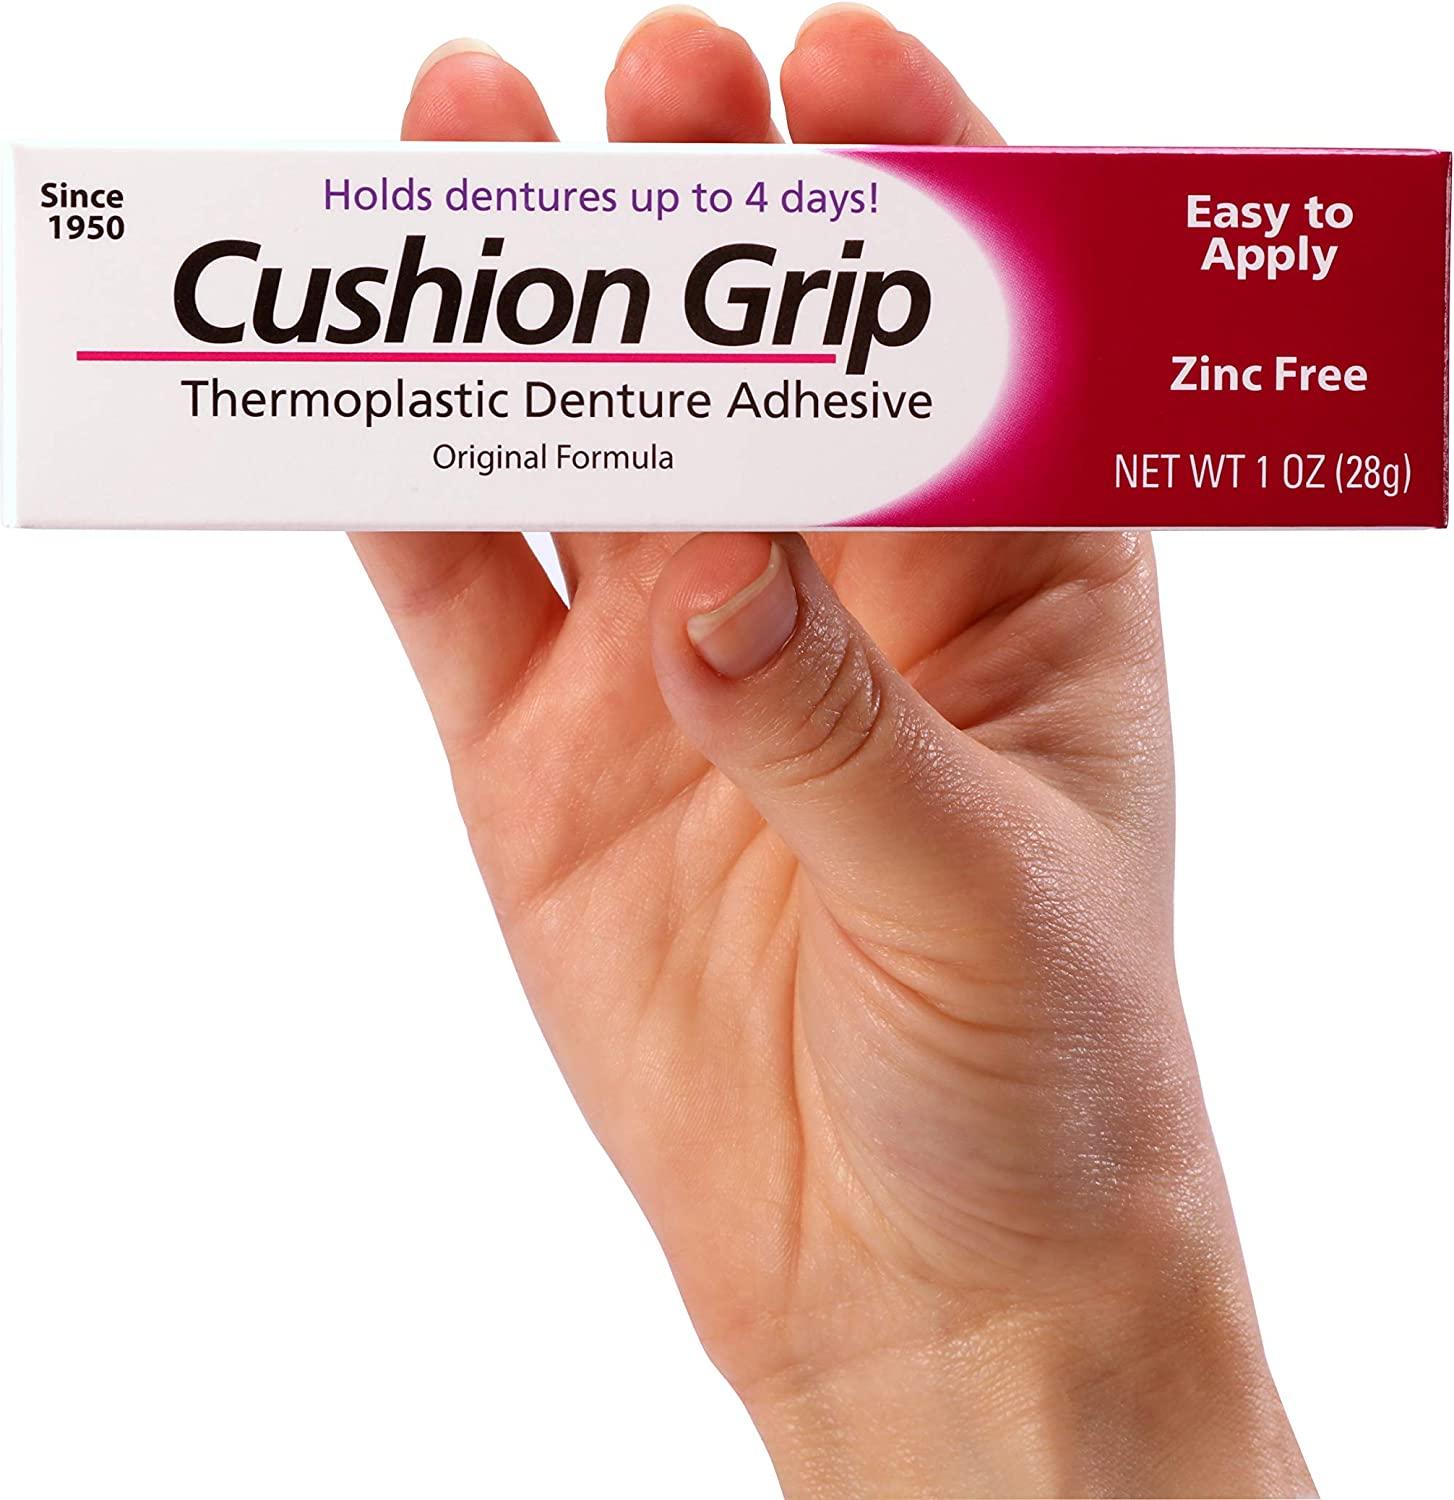 Cushion Grip - a Soft Pliable Thermoplastic for Refitting and